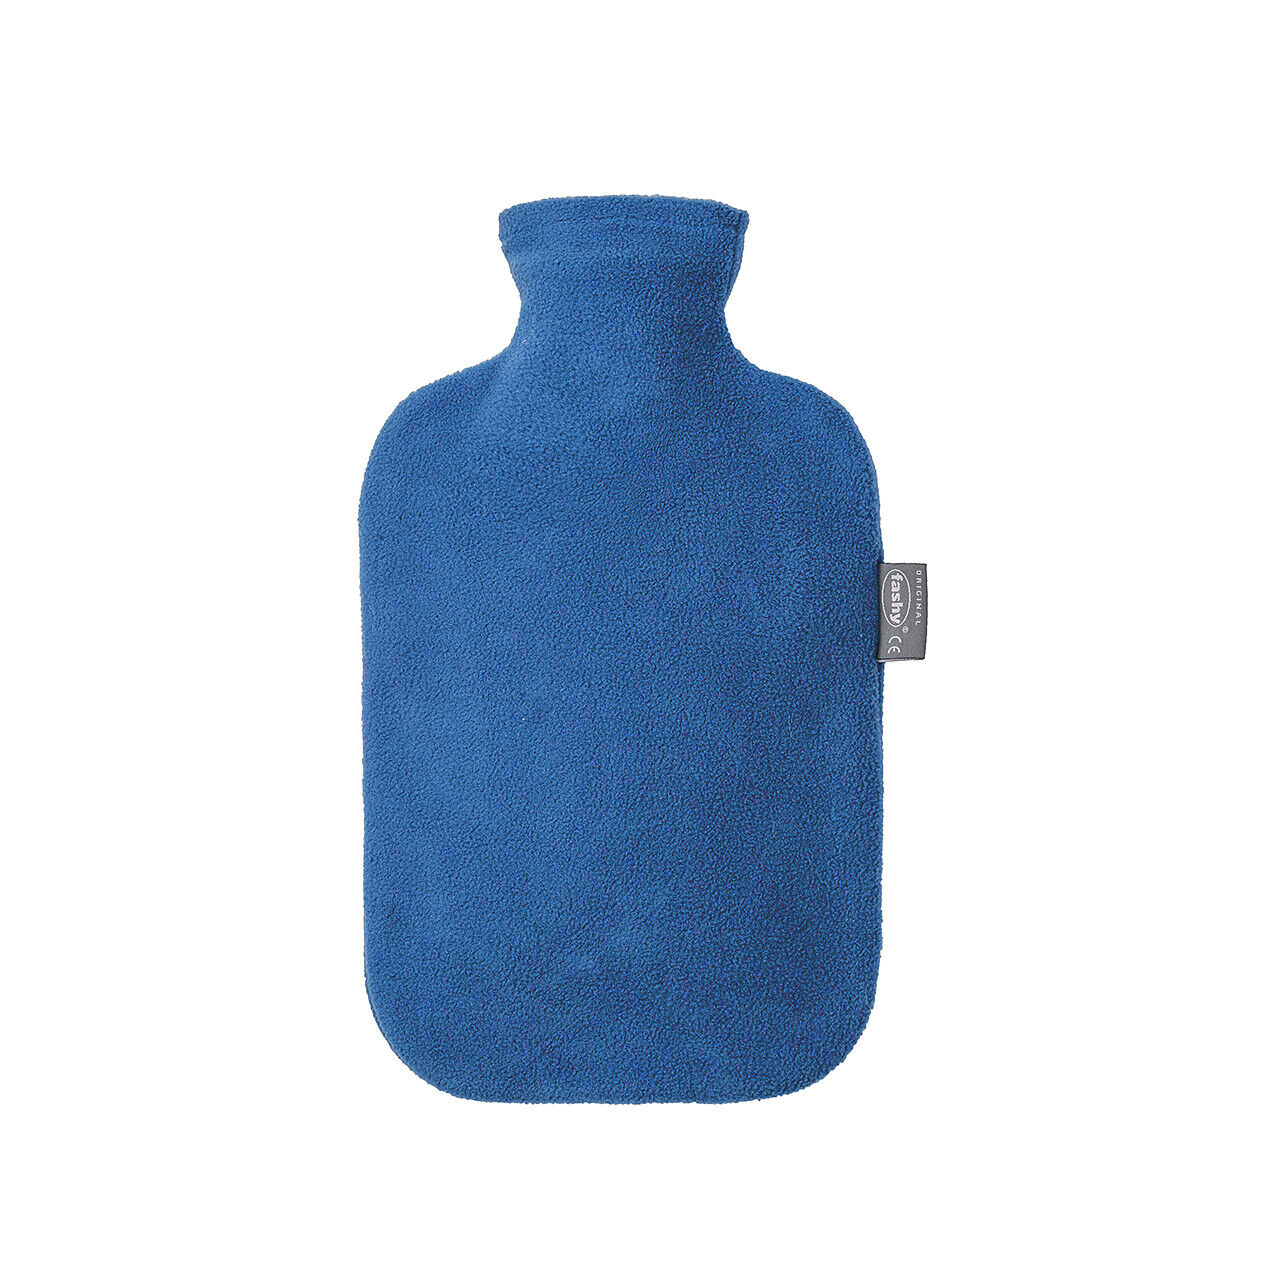 Fashy Hot Water Bottle with Fleece Cover Sapphire 2L Water Bottle